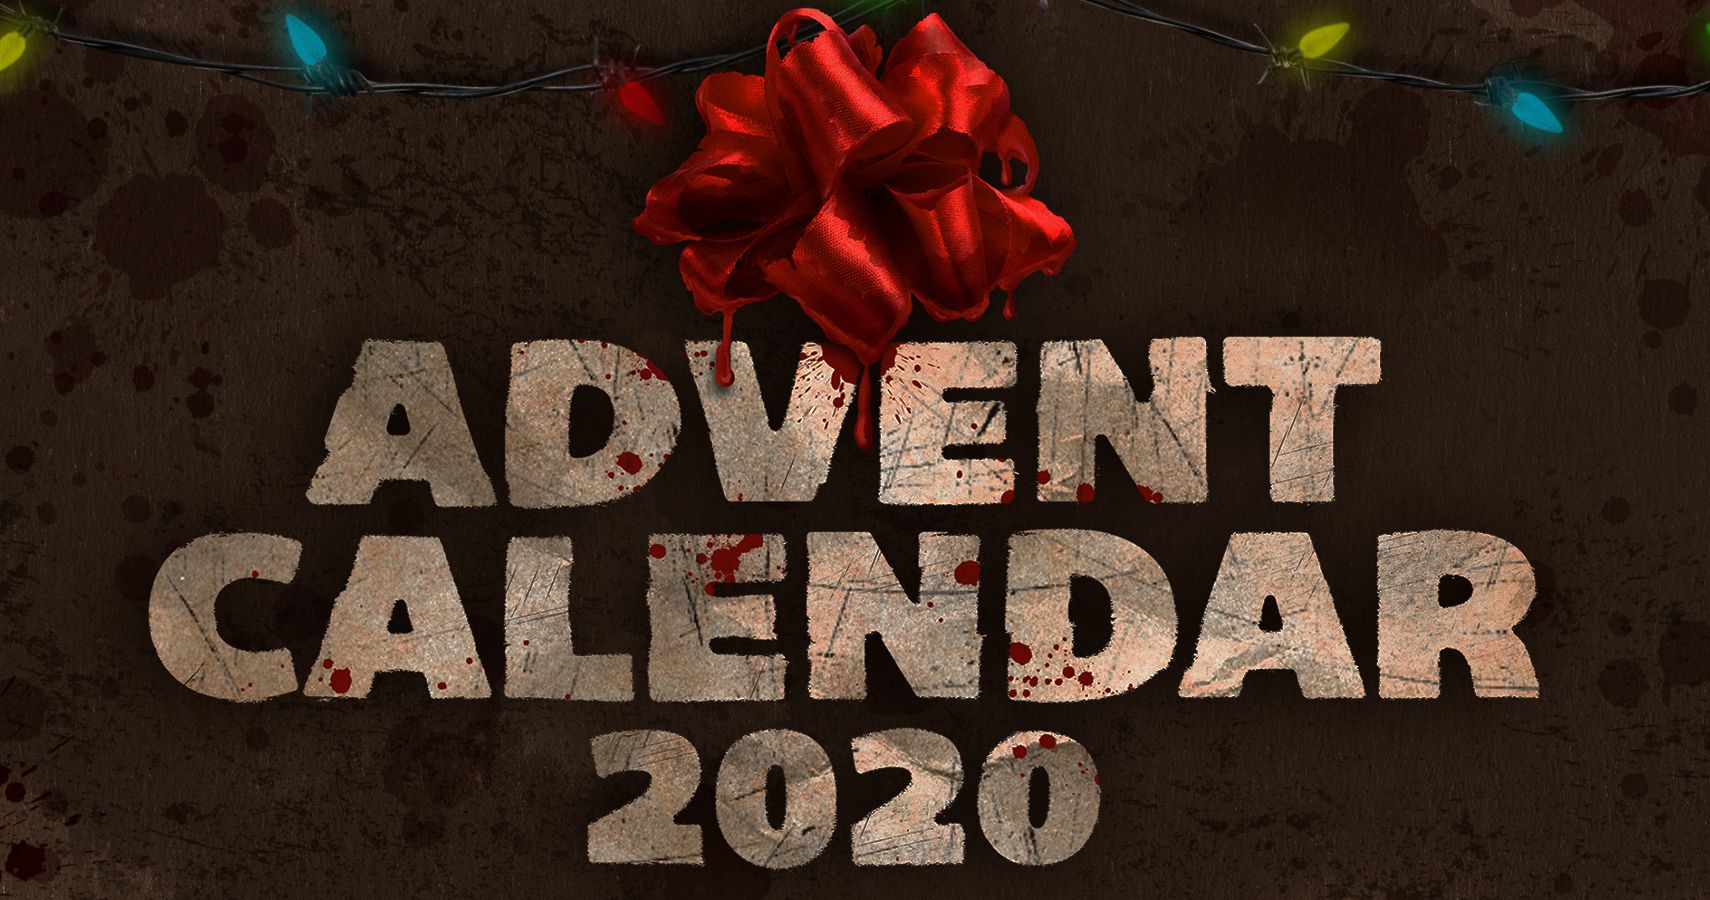 Dead by Daylight Announces The Advent Calendar Celebration For The